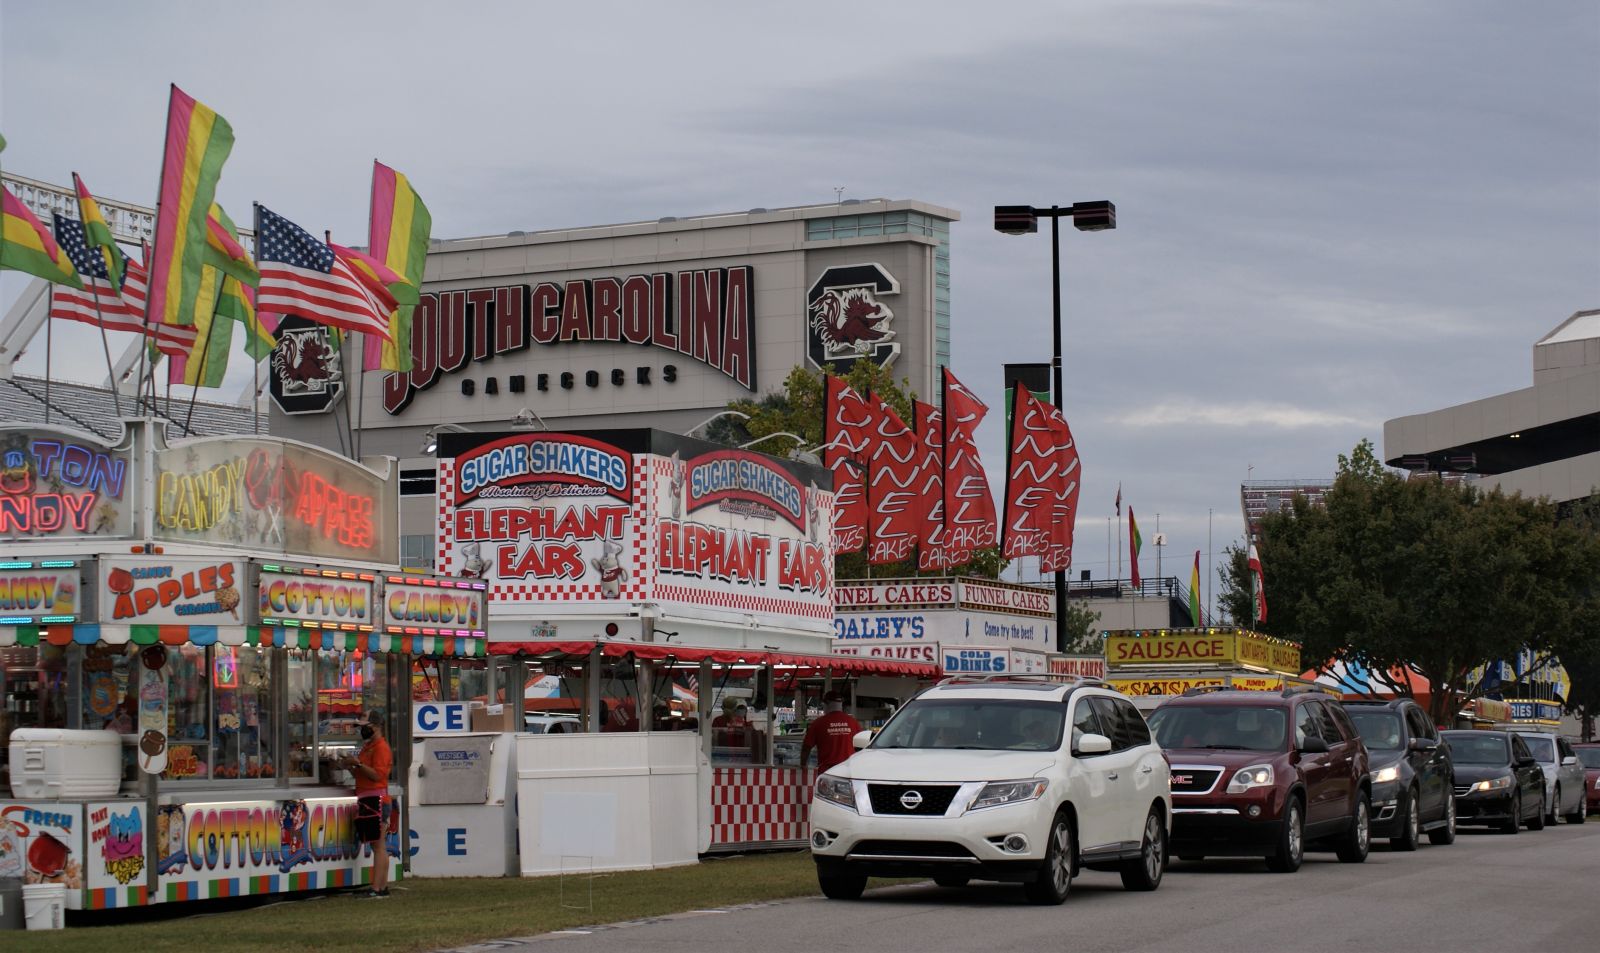 The S.C. State Fair will offer a drive-through food event on April 6. Guests can grab corn dogs, elephant ears, candy apples and other fair favorites from their cars. (Photo/Provided)